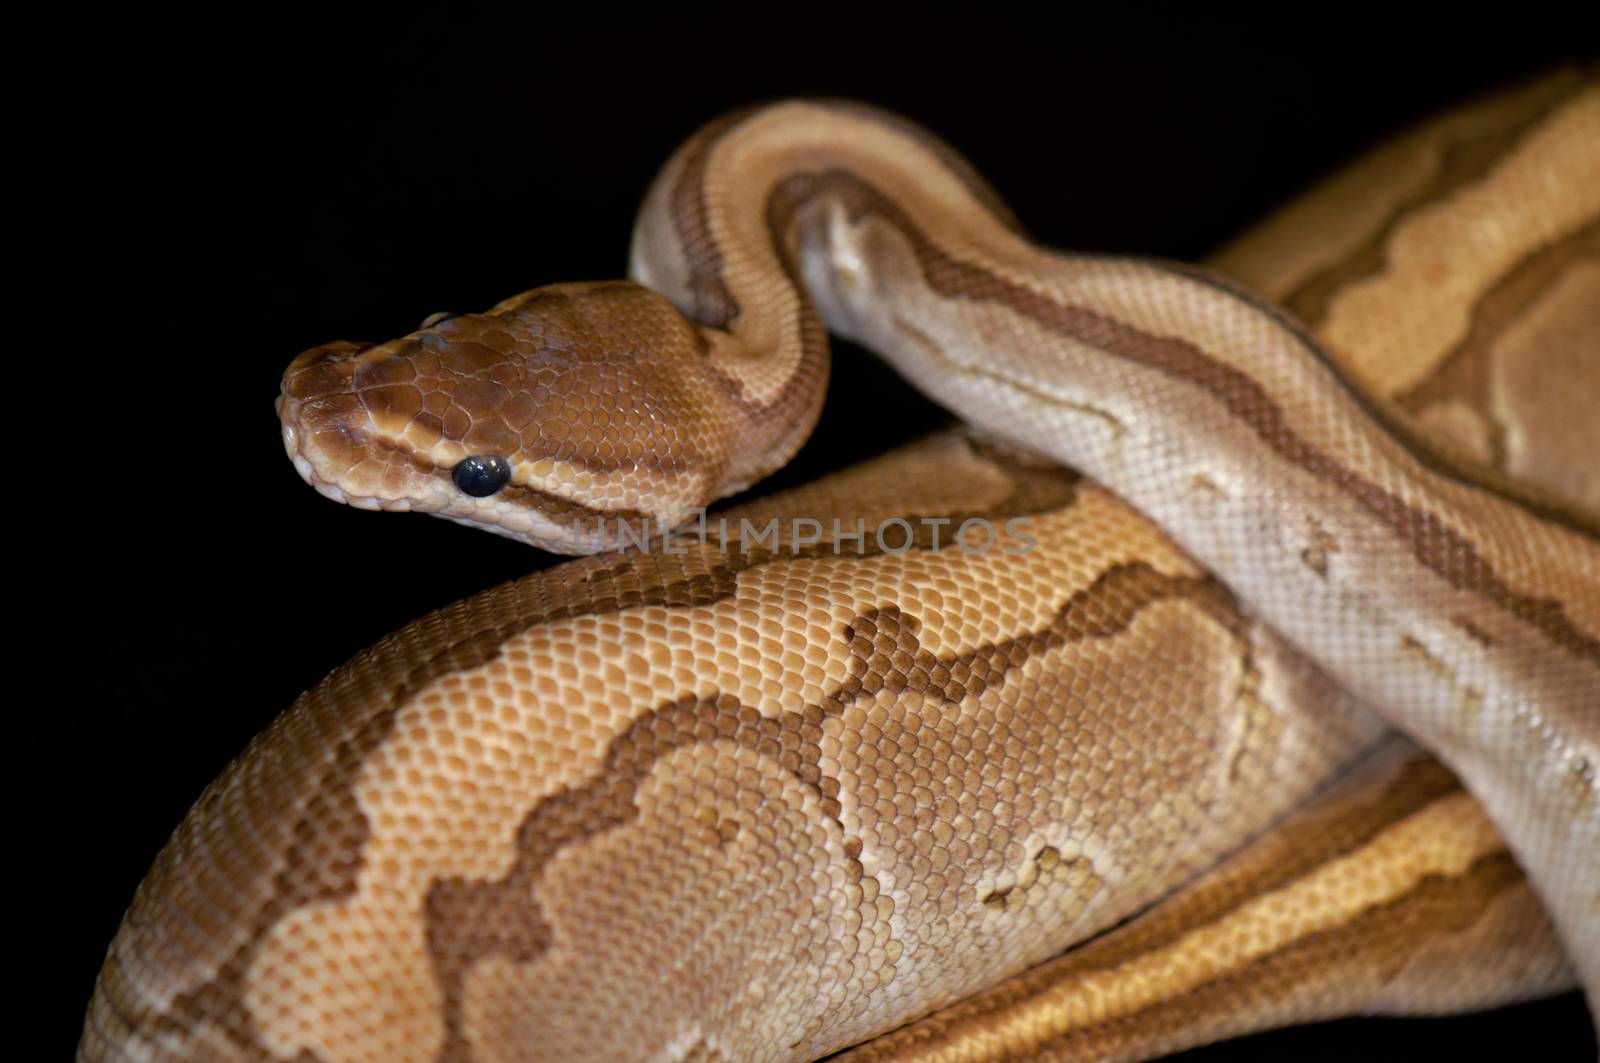 Ball Python detail by rgbspace